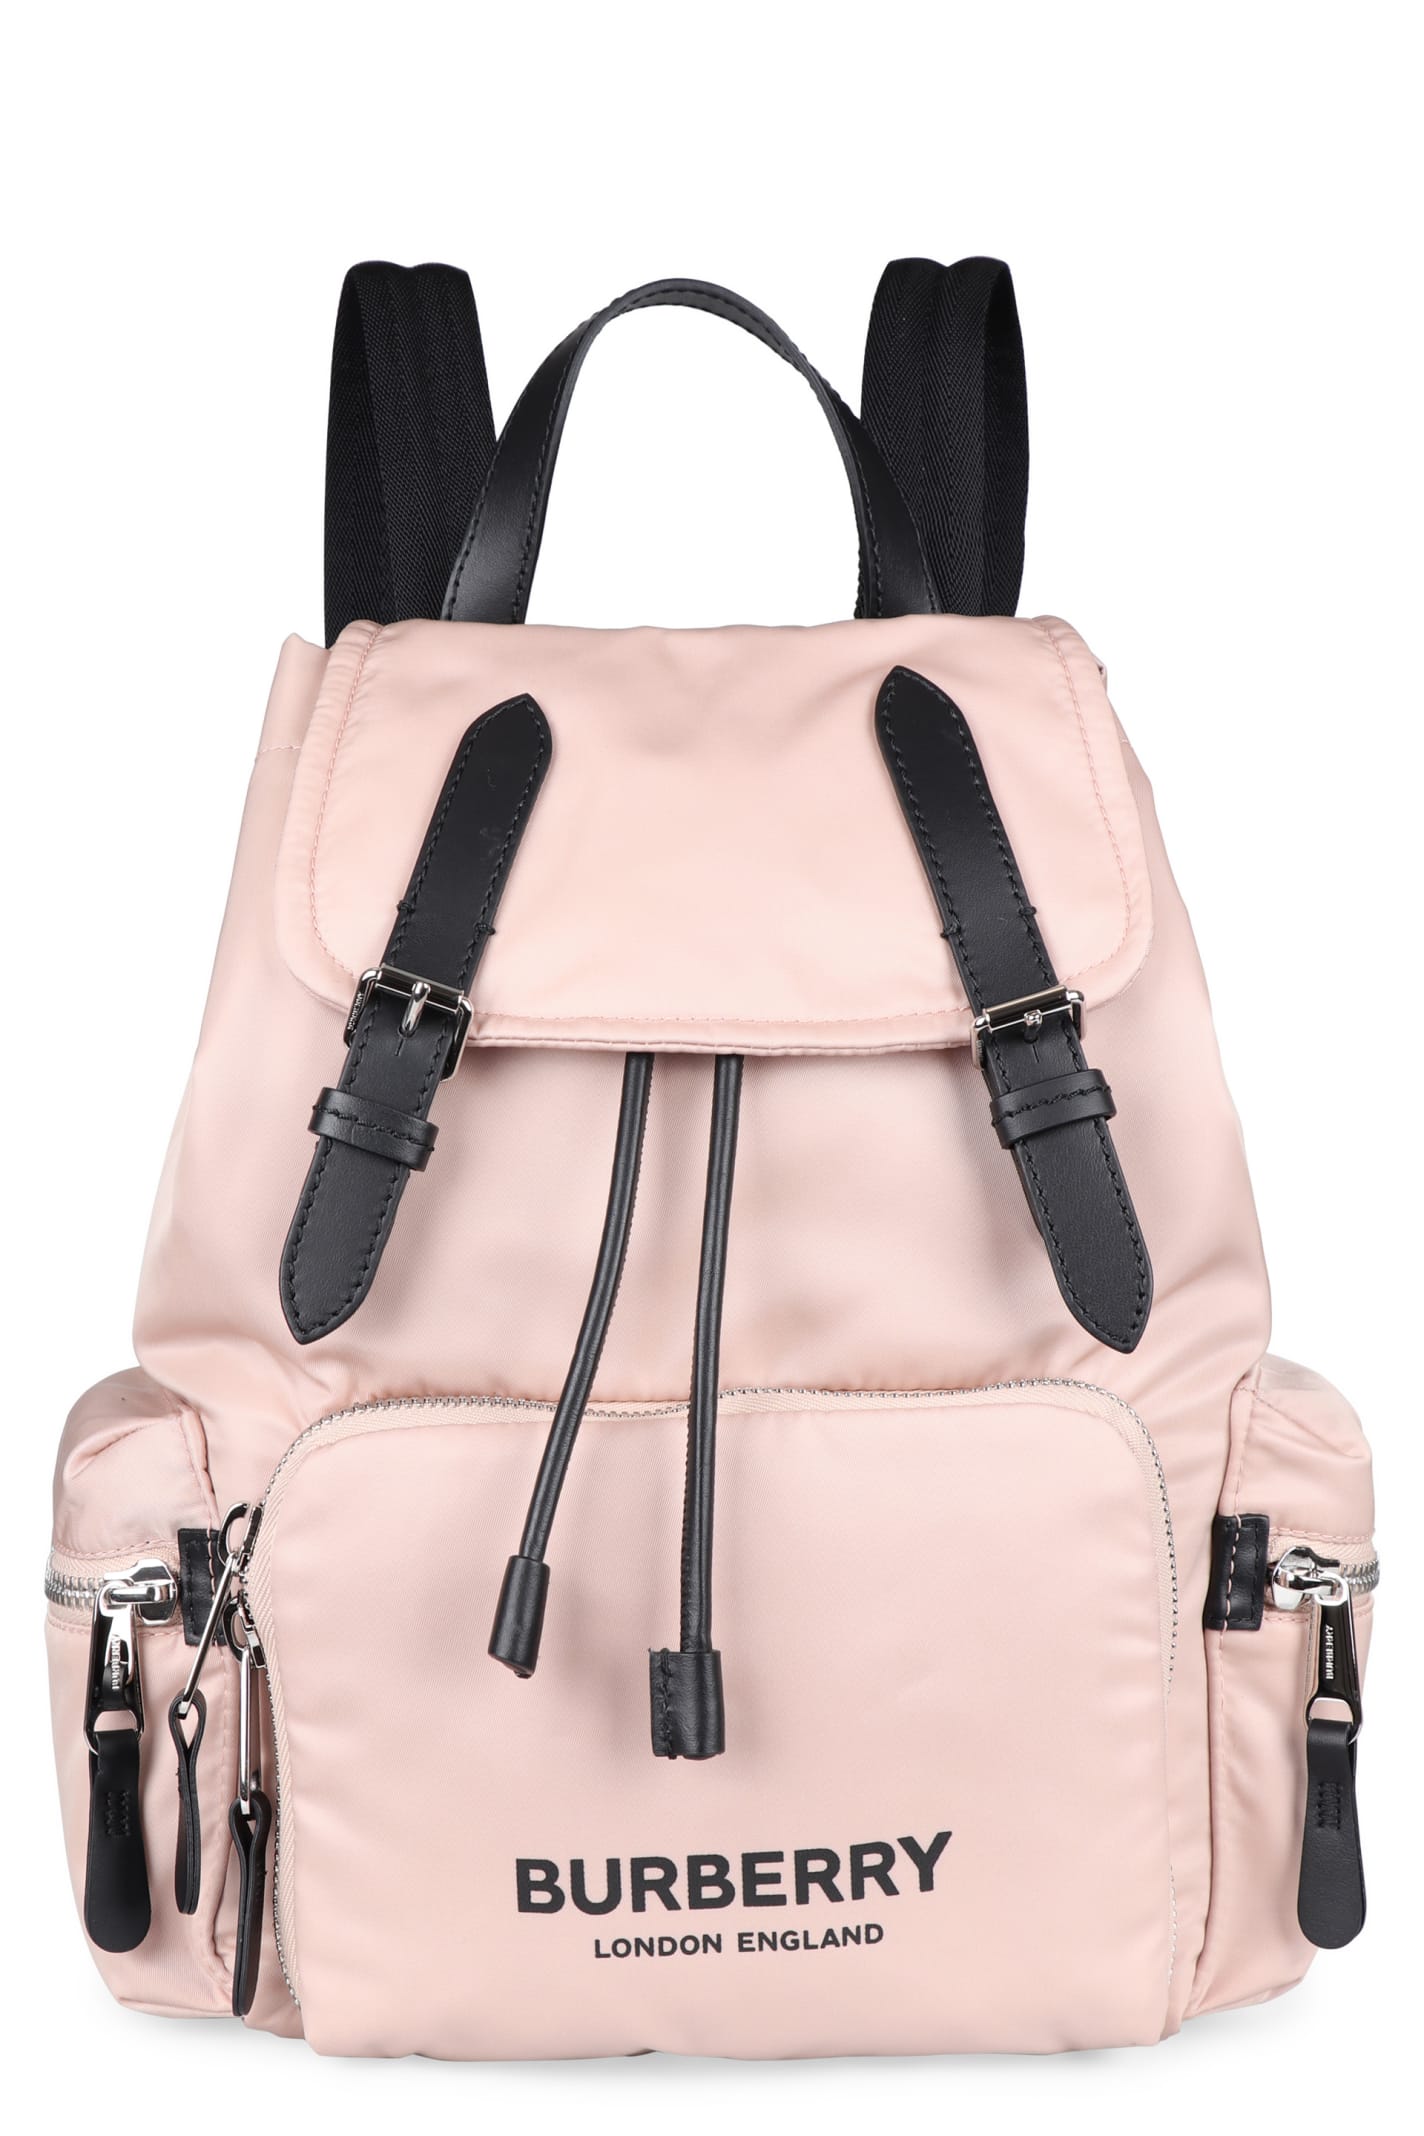 burberry backpack pink